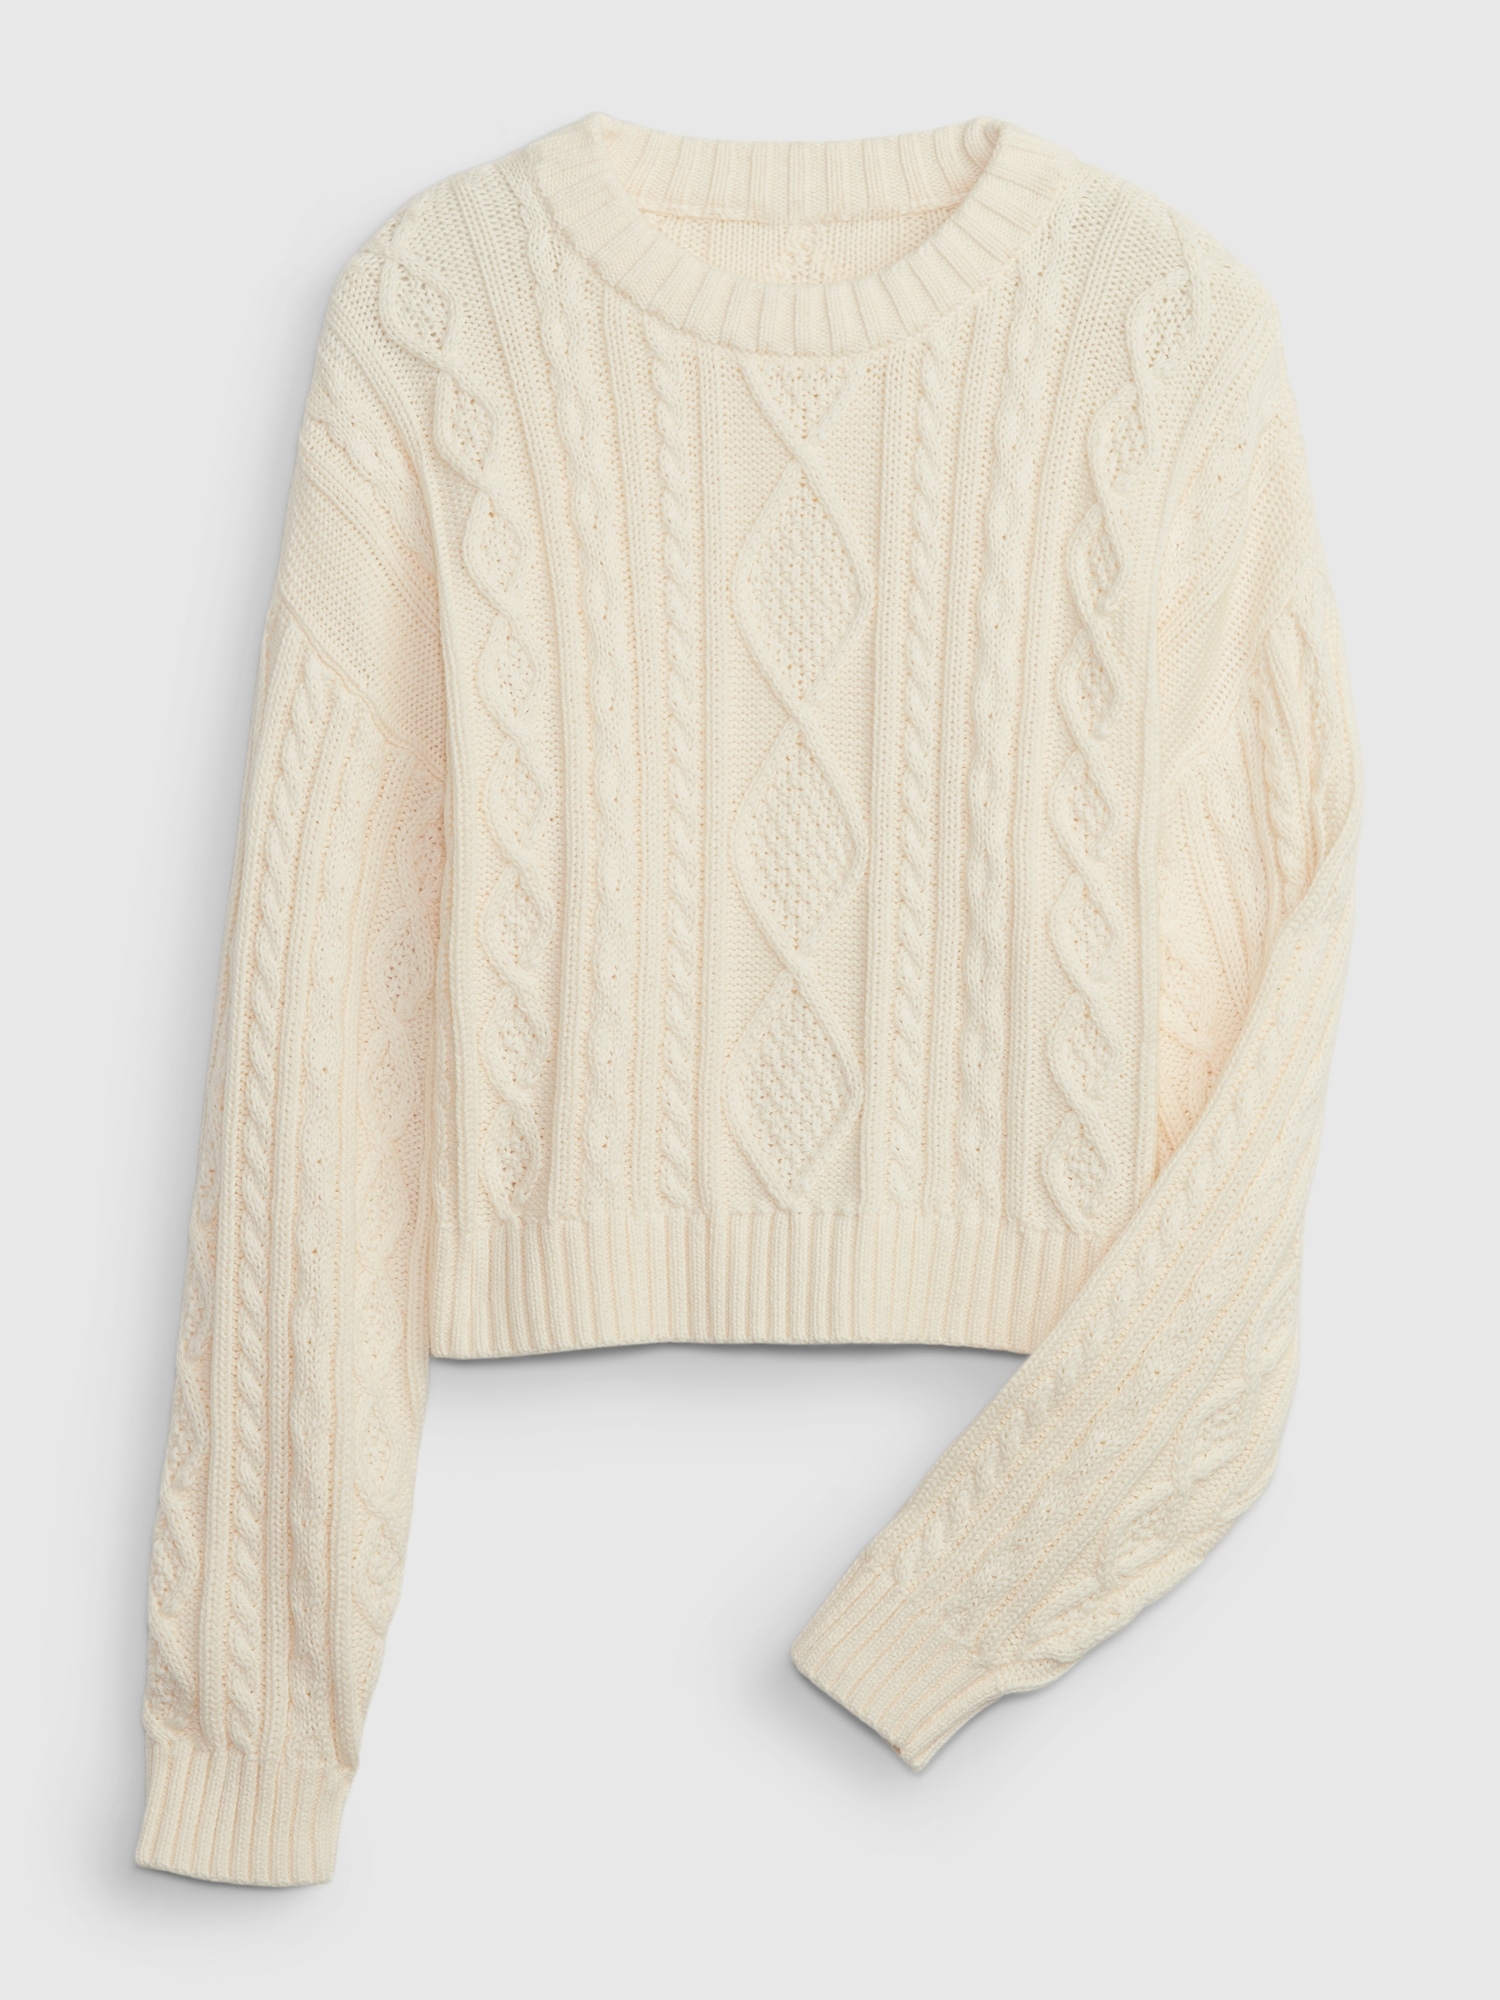 Kids Cable-Knit Sweater